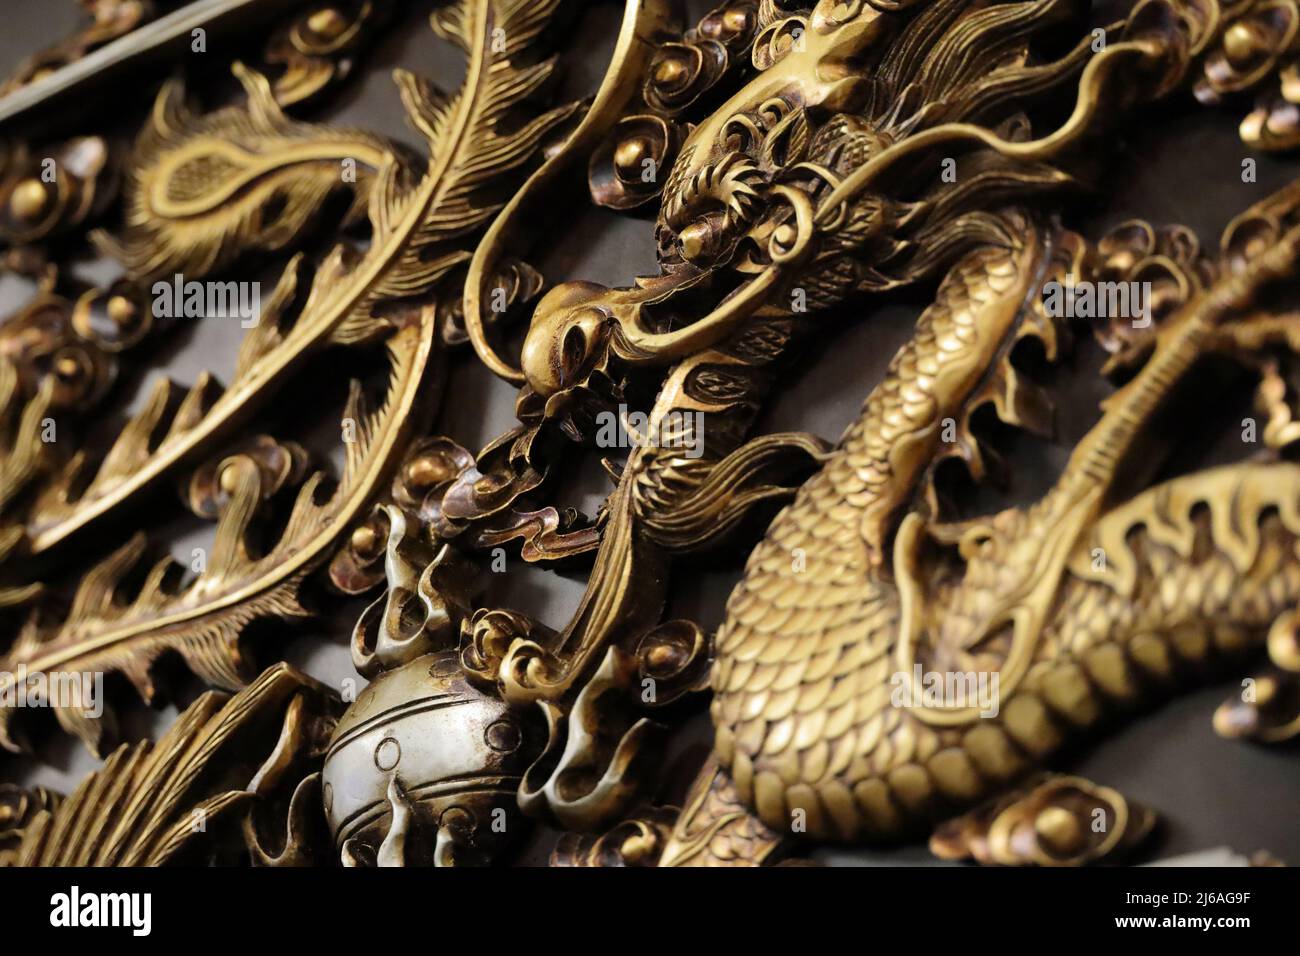 Dragon carvings on the wall decoration Stock Photo